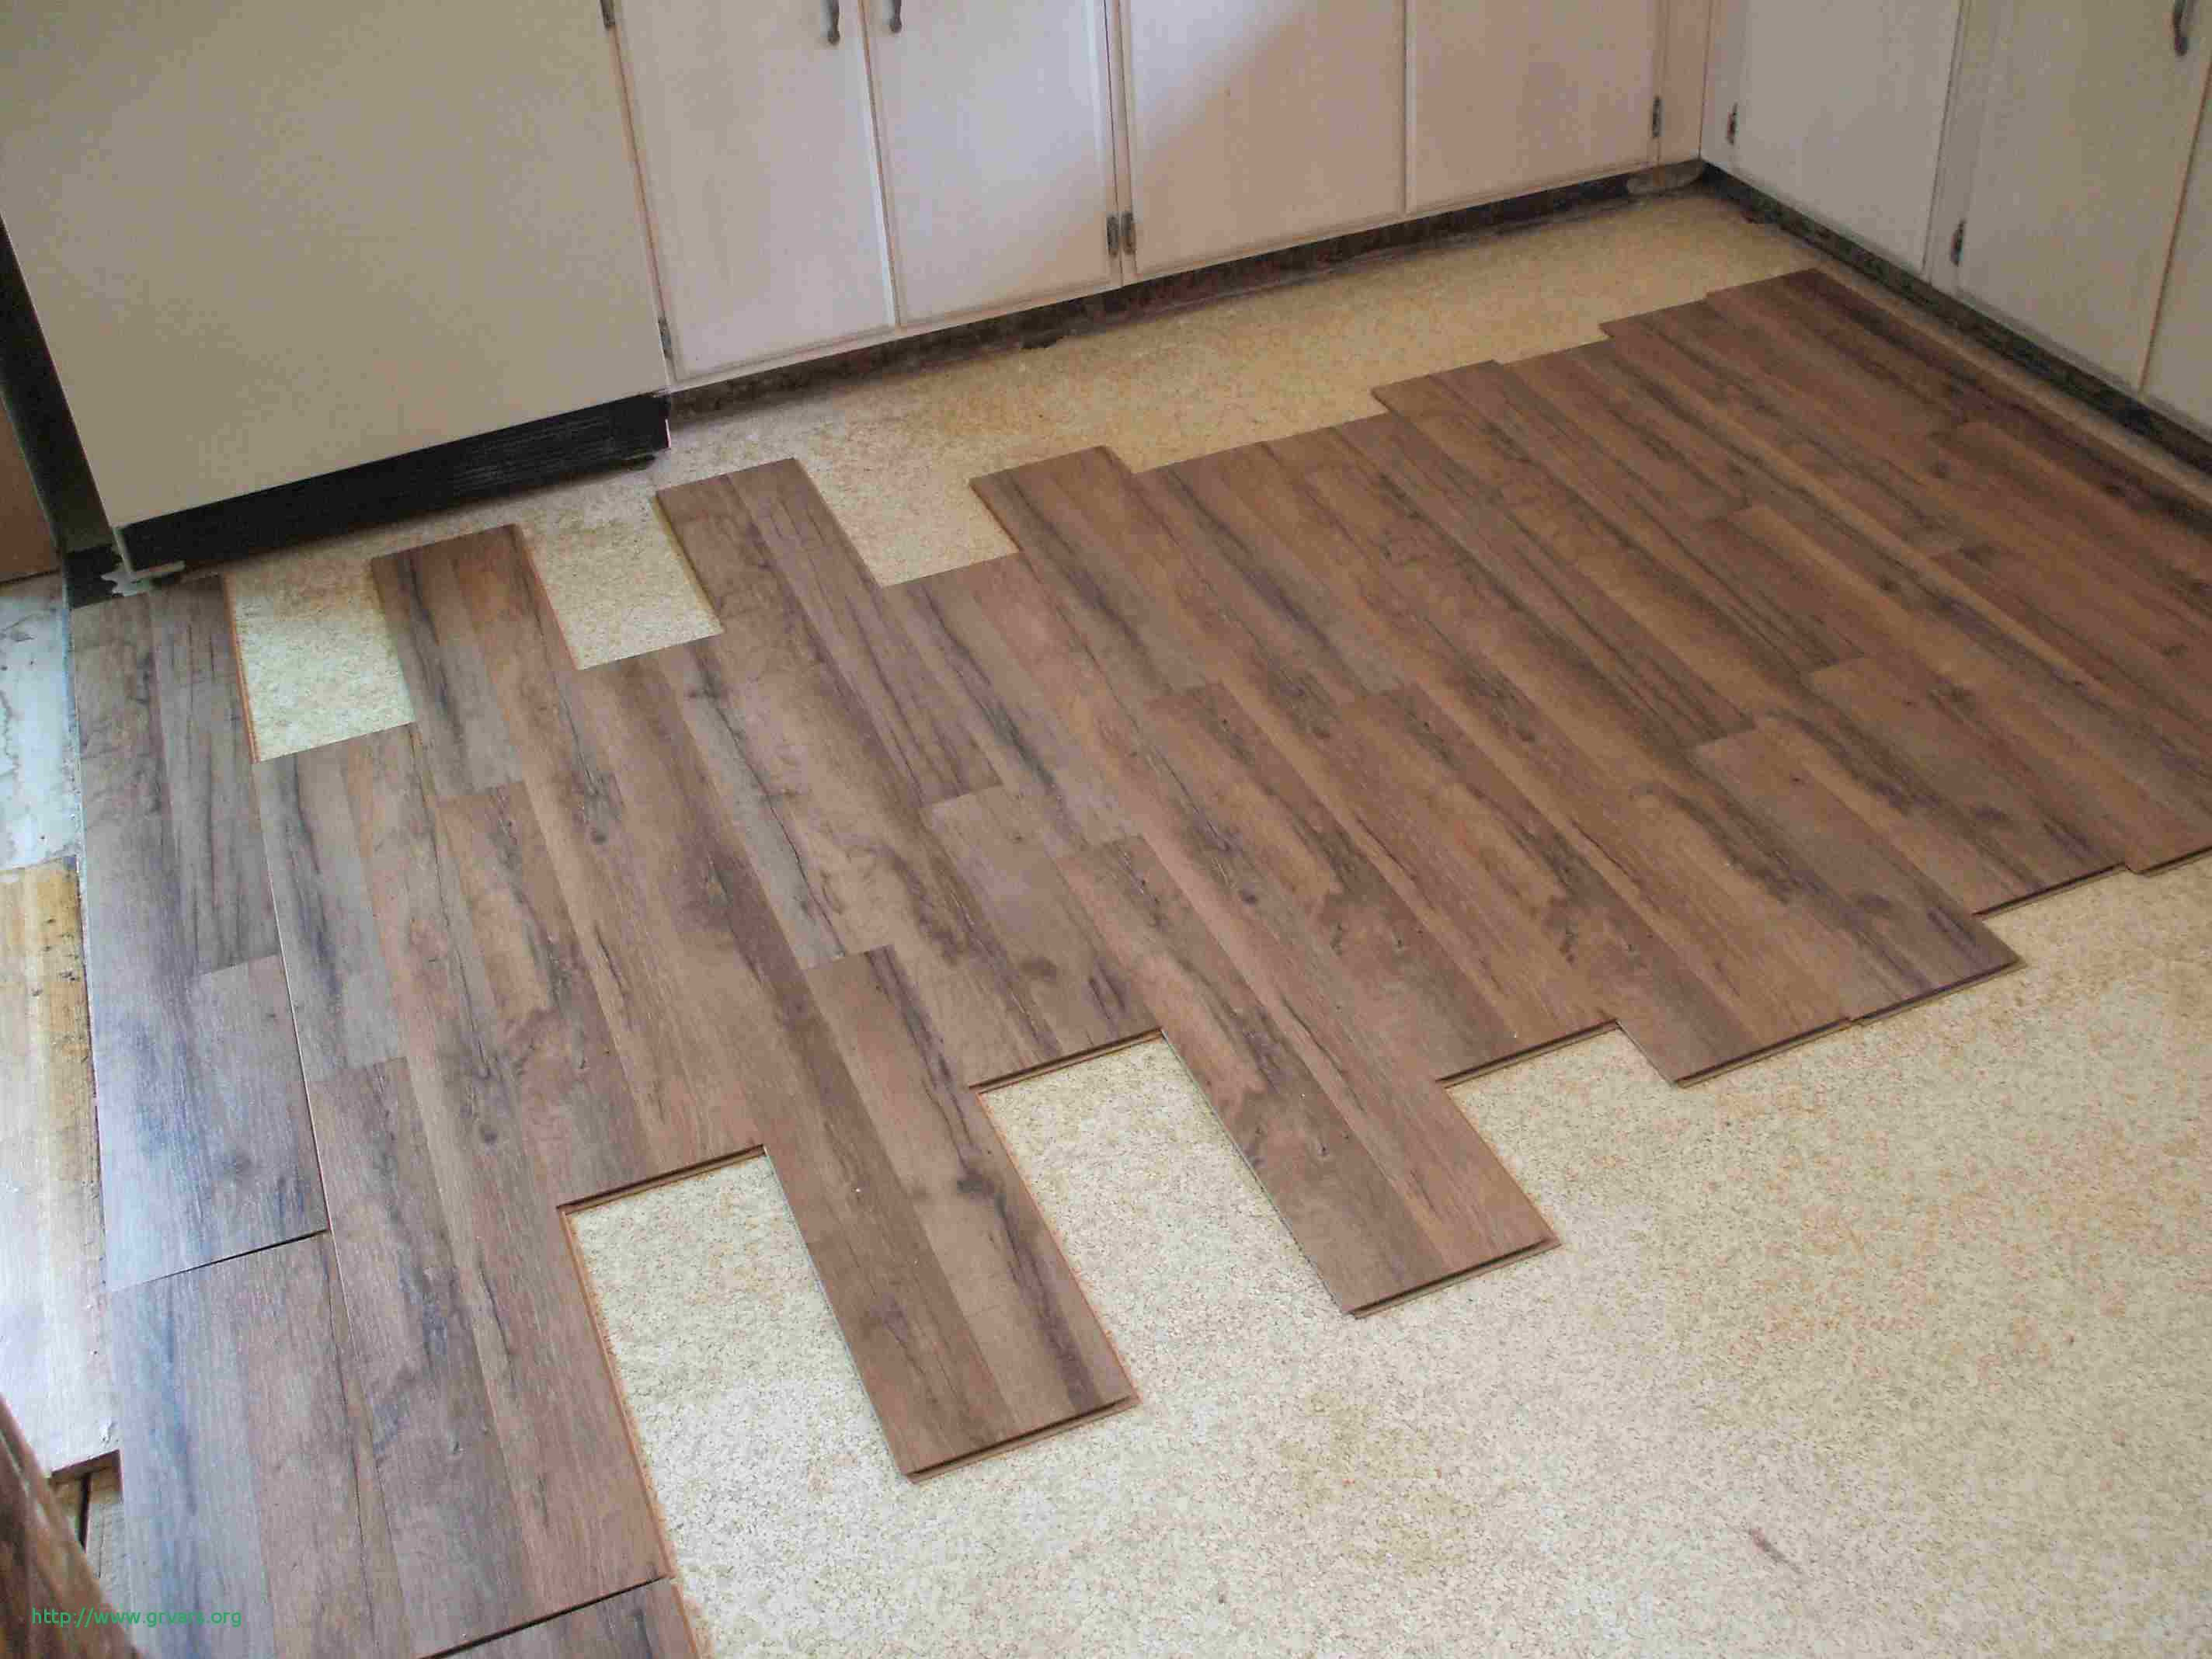 25 Wonderful Home Depot Hardwood Floor Installation Cost Per Square Foot 2024 free download home depot hardwood floor installation cost per square foot of average cost per square foot to install hardwood floors charmant a throughout average cost per square foot to install hardwood 